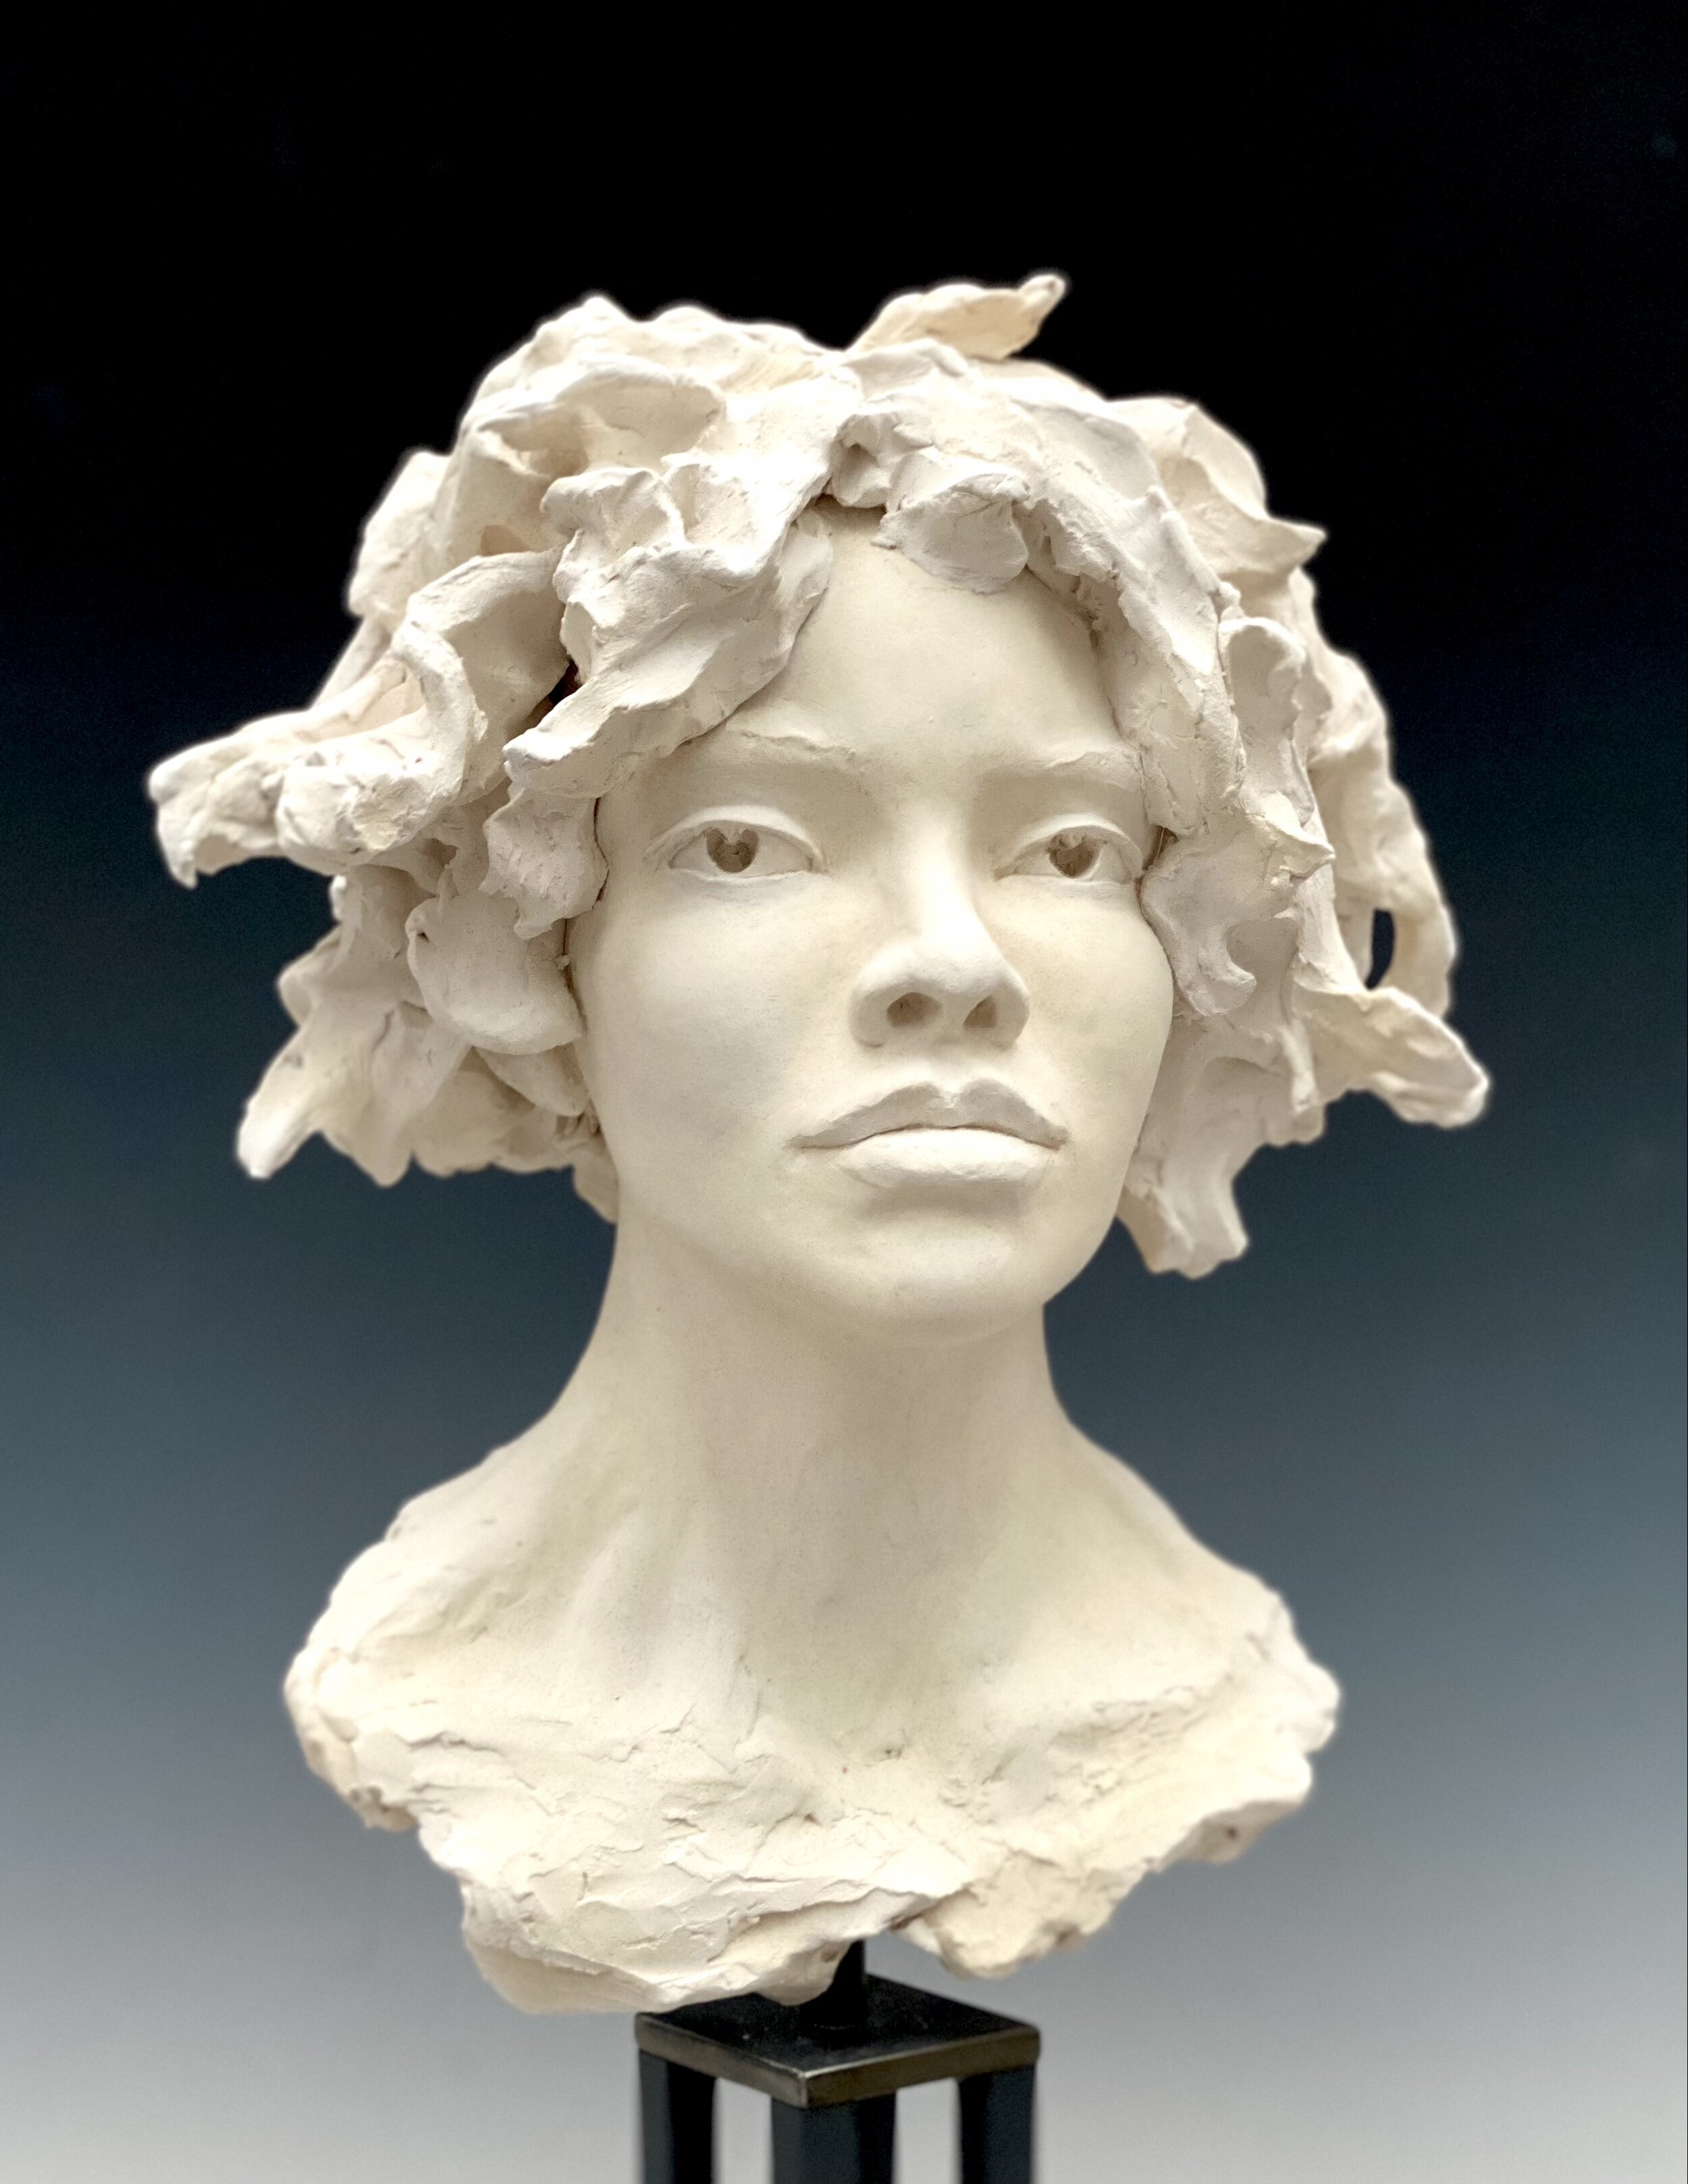  Woman’s Head, 2020, lifesize, bisque-fired stoneware on steel base. 